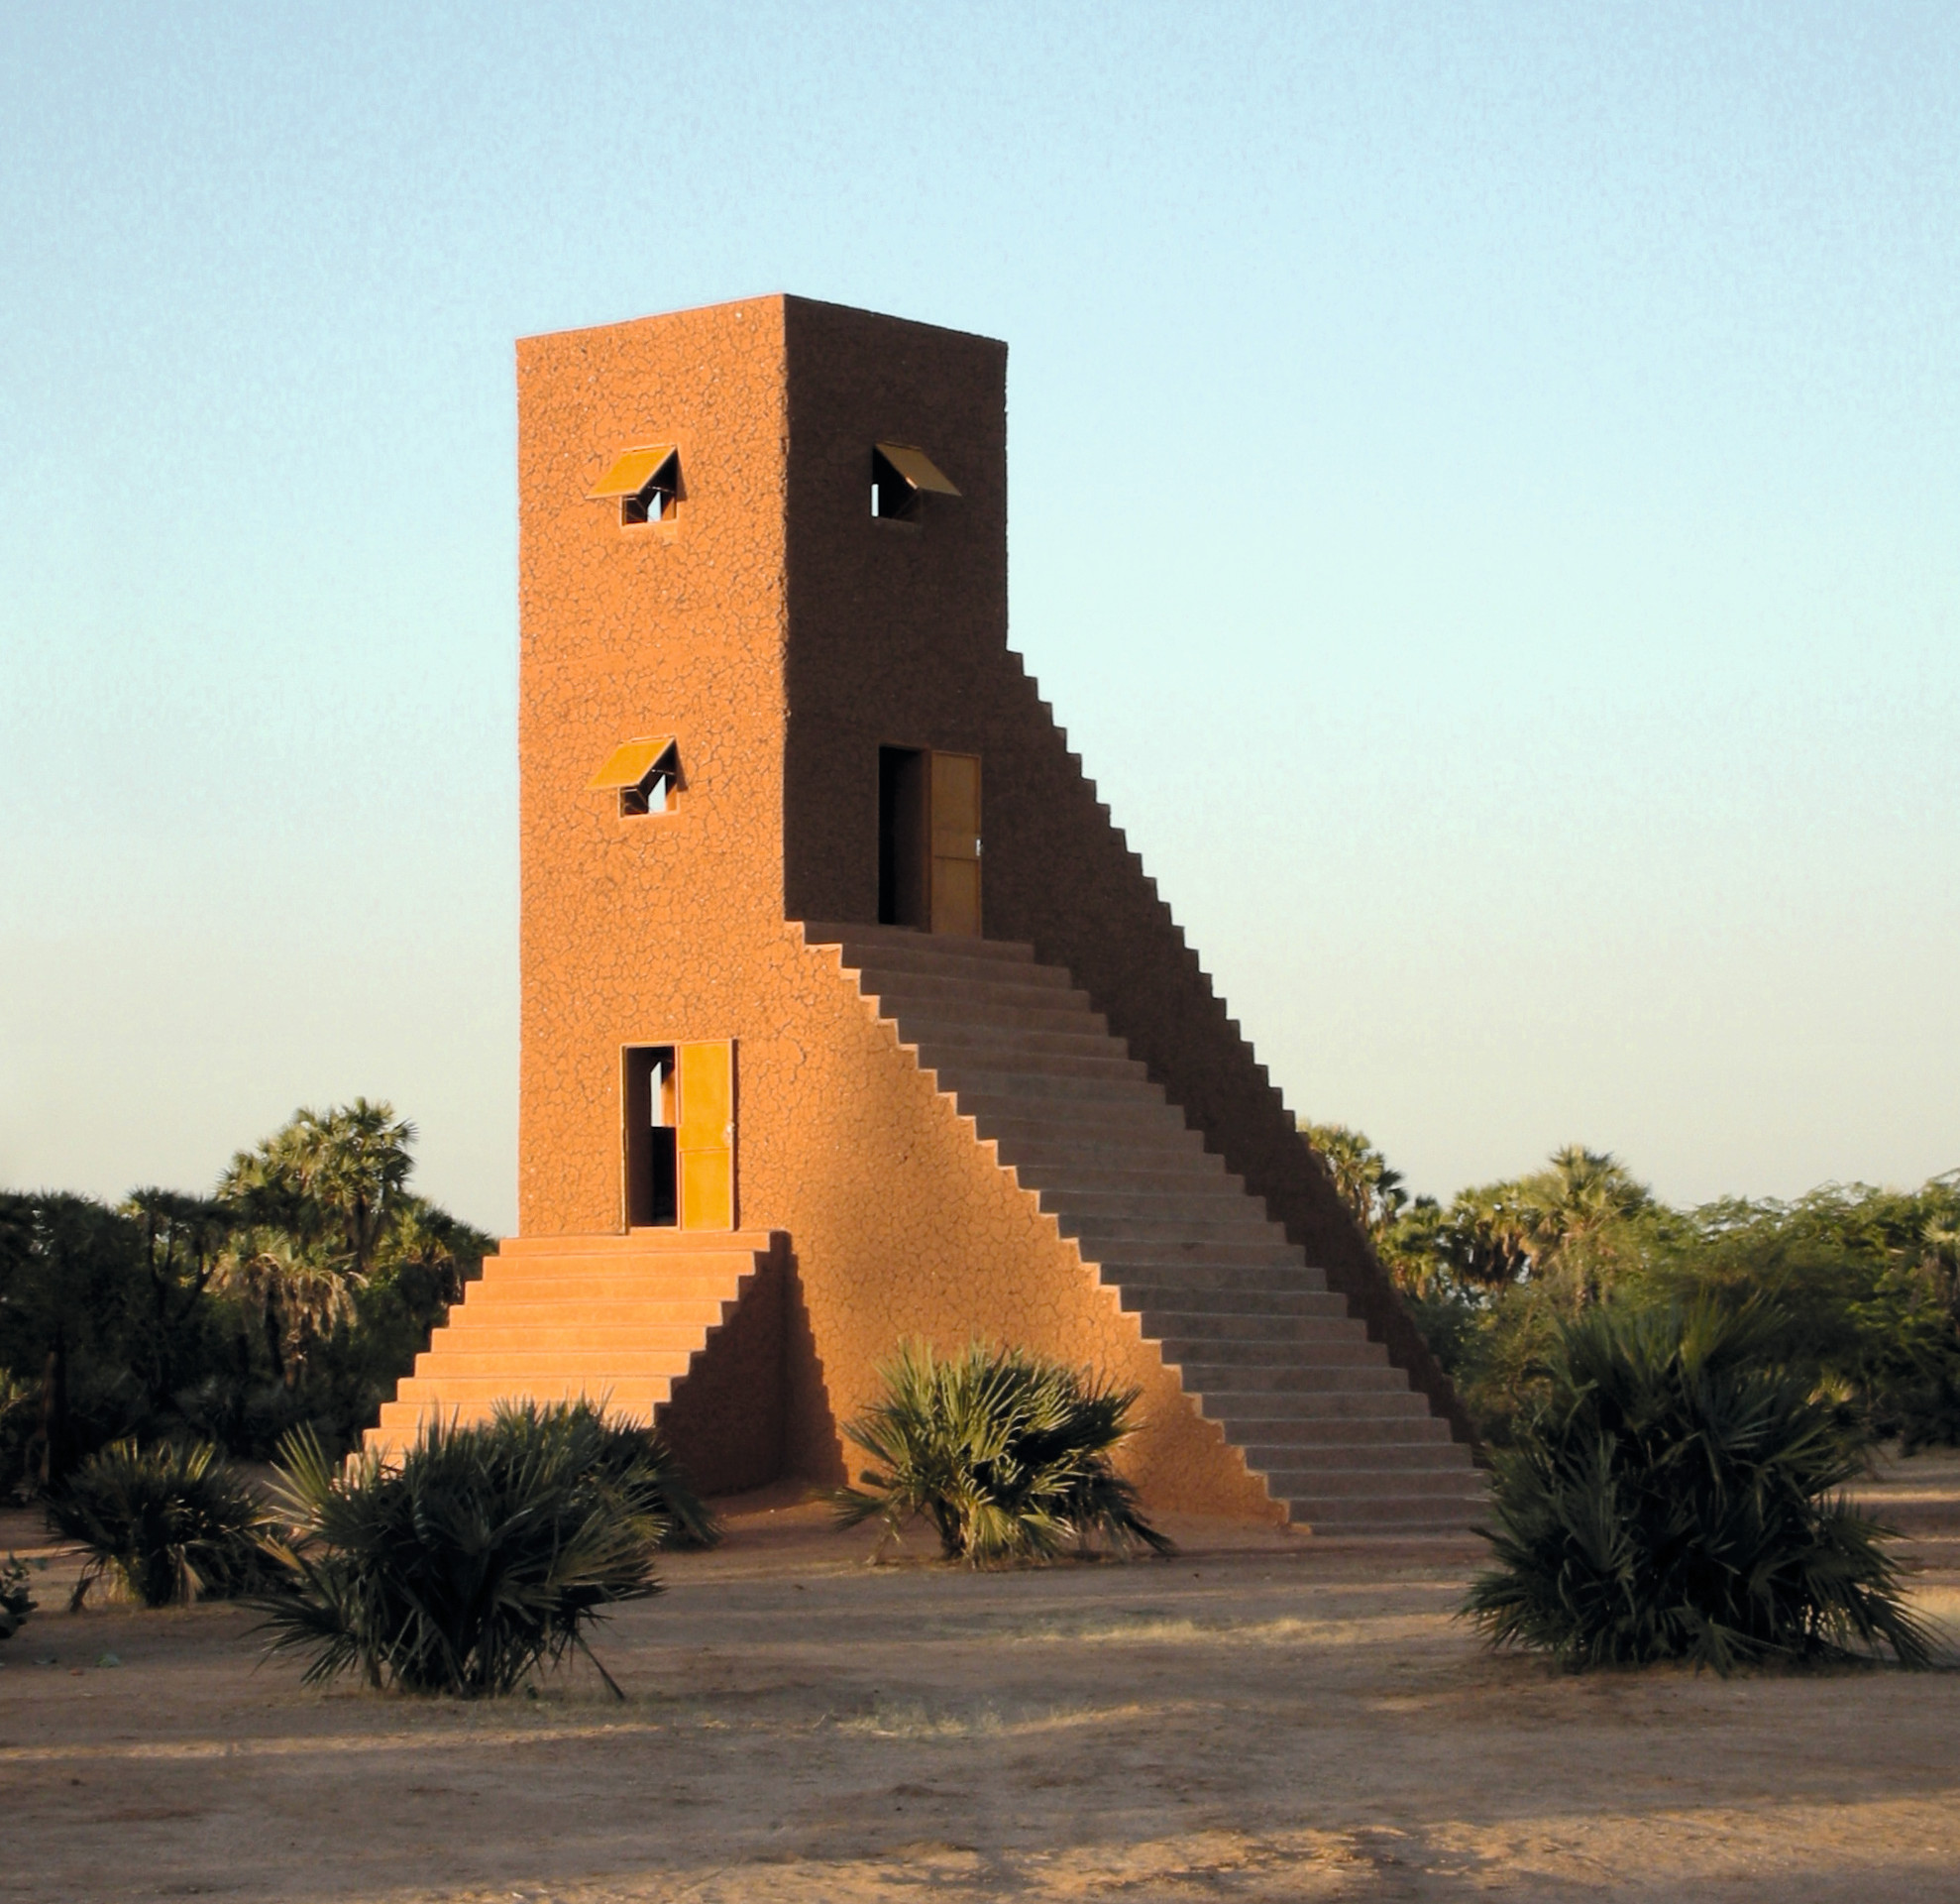 House to Watch the Sunset, 2005, Aladab, near Agadez, Niger, by Not Vital